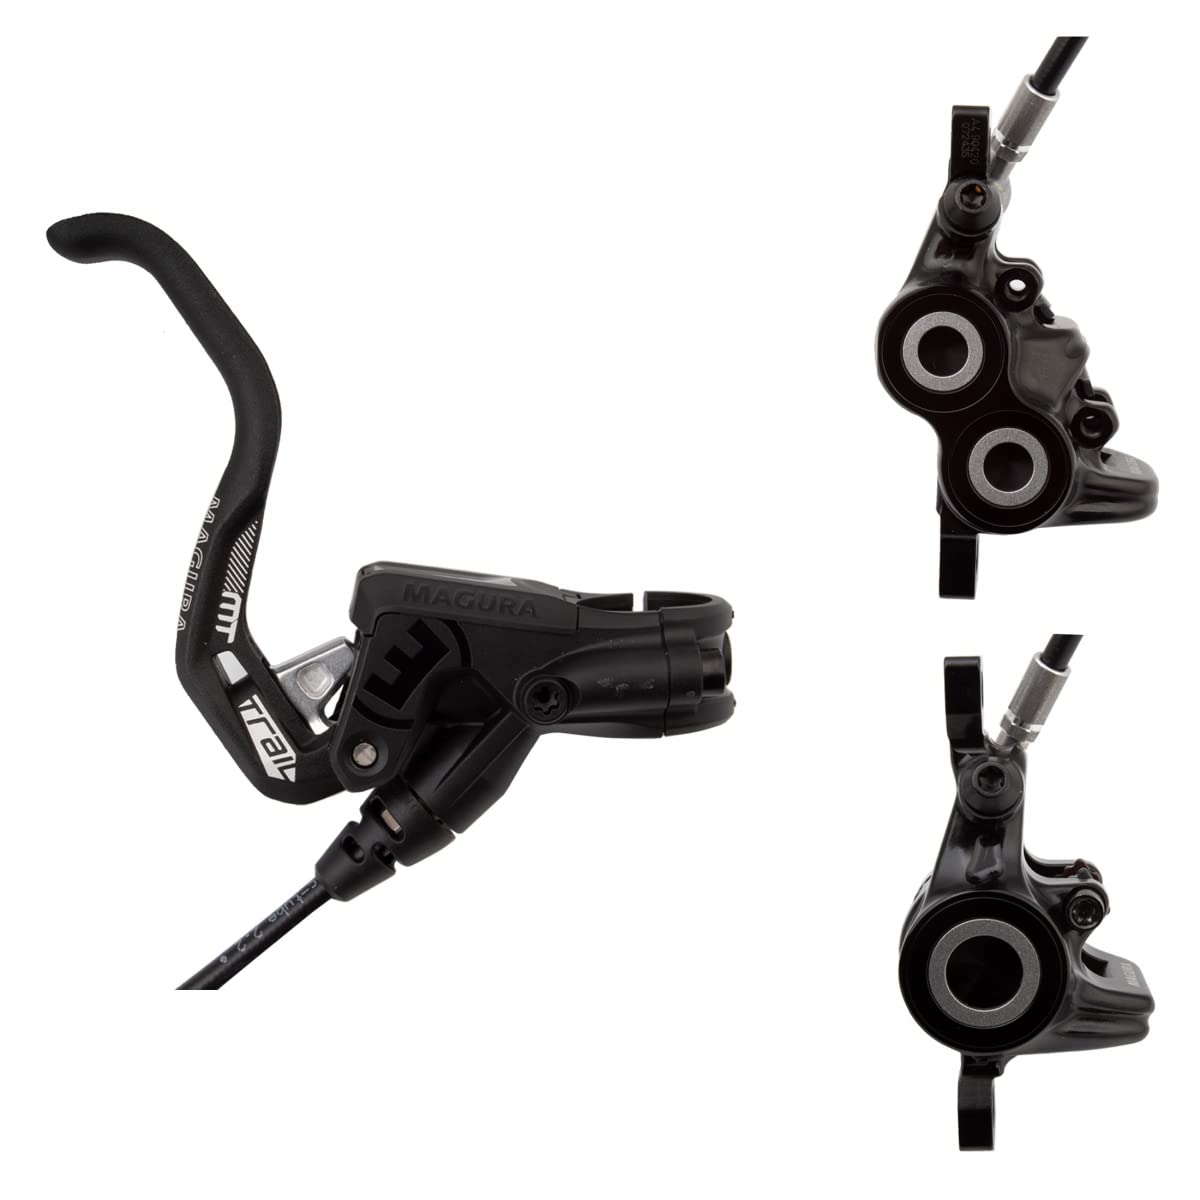 Magura MT Trail Sport 2701389 Bicycle Brake 1-Finger HC Lever Left/Right Suitable Set Consisting of Two Brakes for Front Wheel 4 and Rear Wheel 2 Pistons, Black, One Size